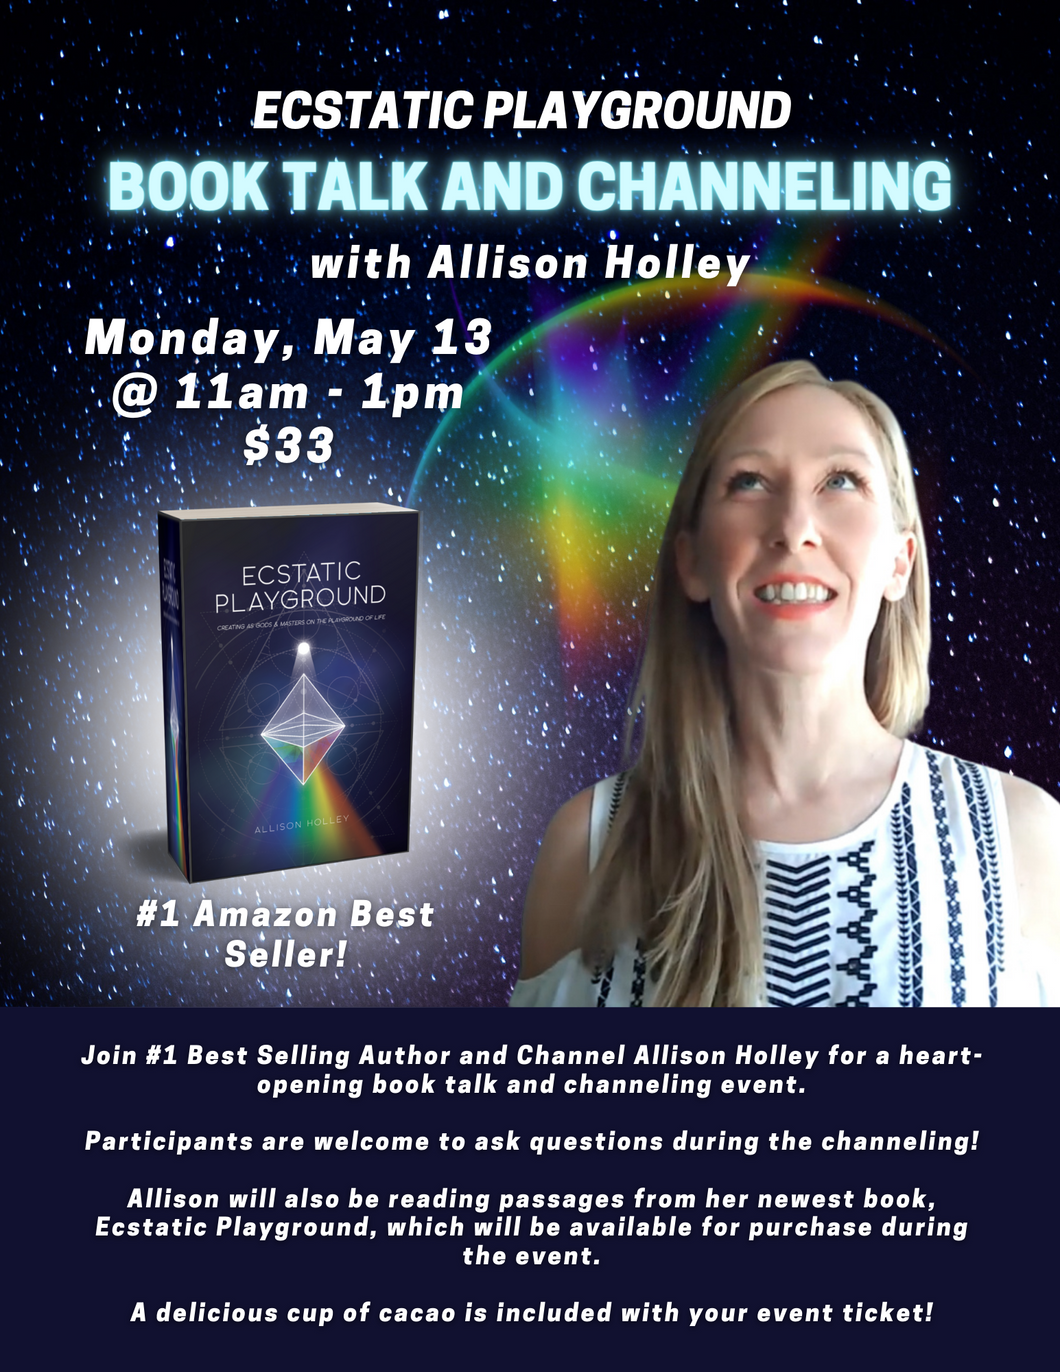 Ecstatic Playground Book Talk and Channeling Event with Allison Holley